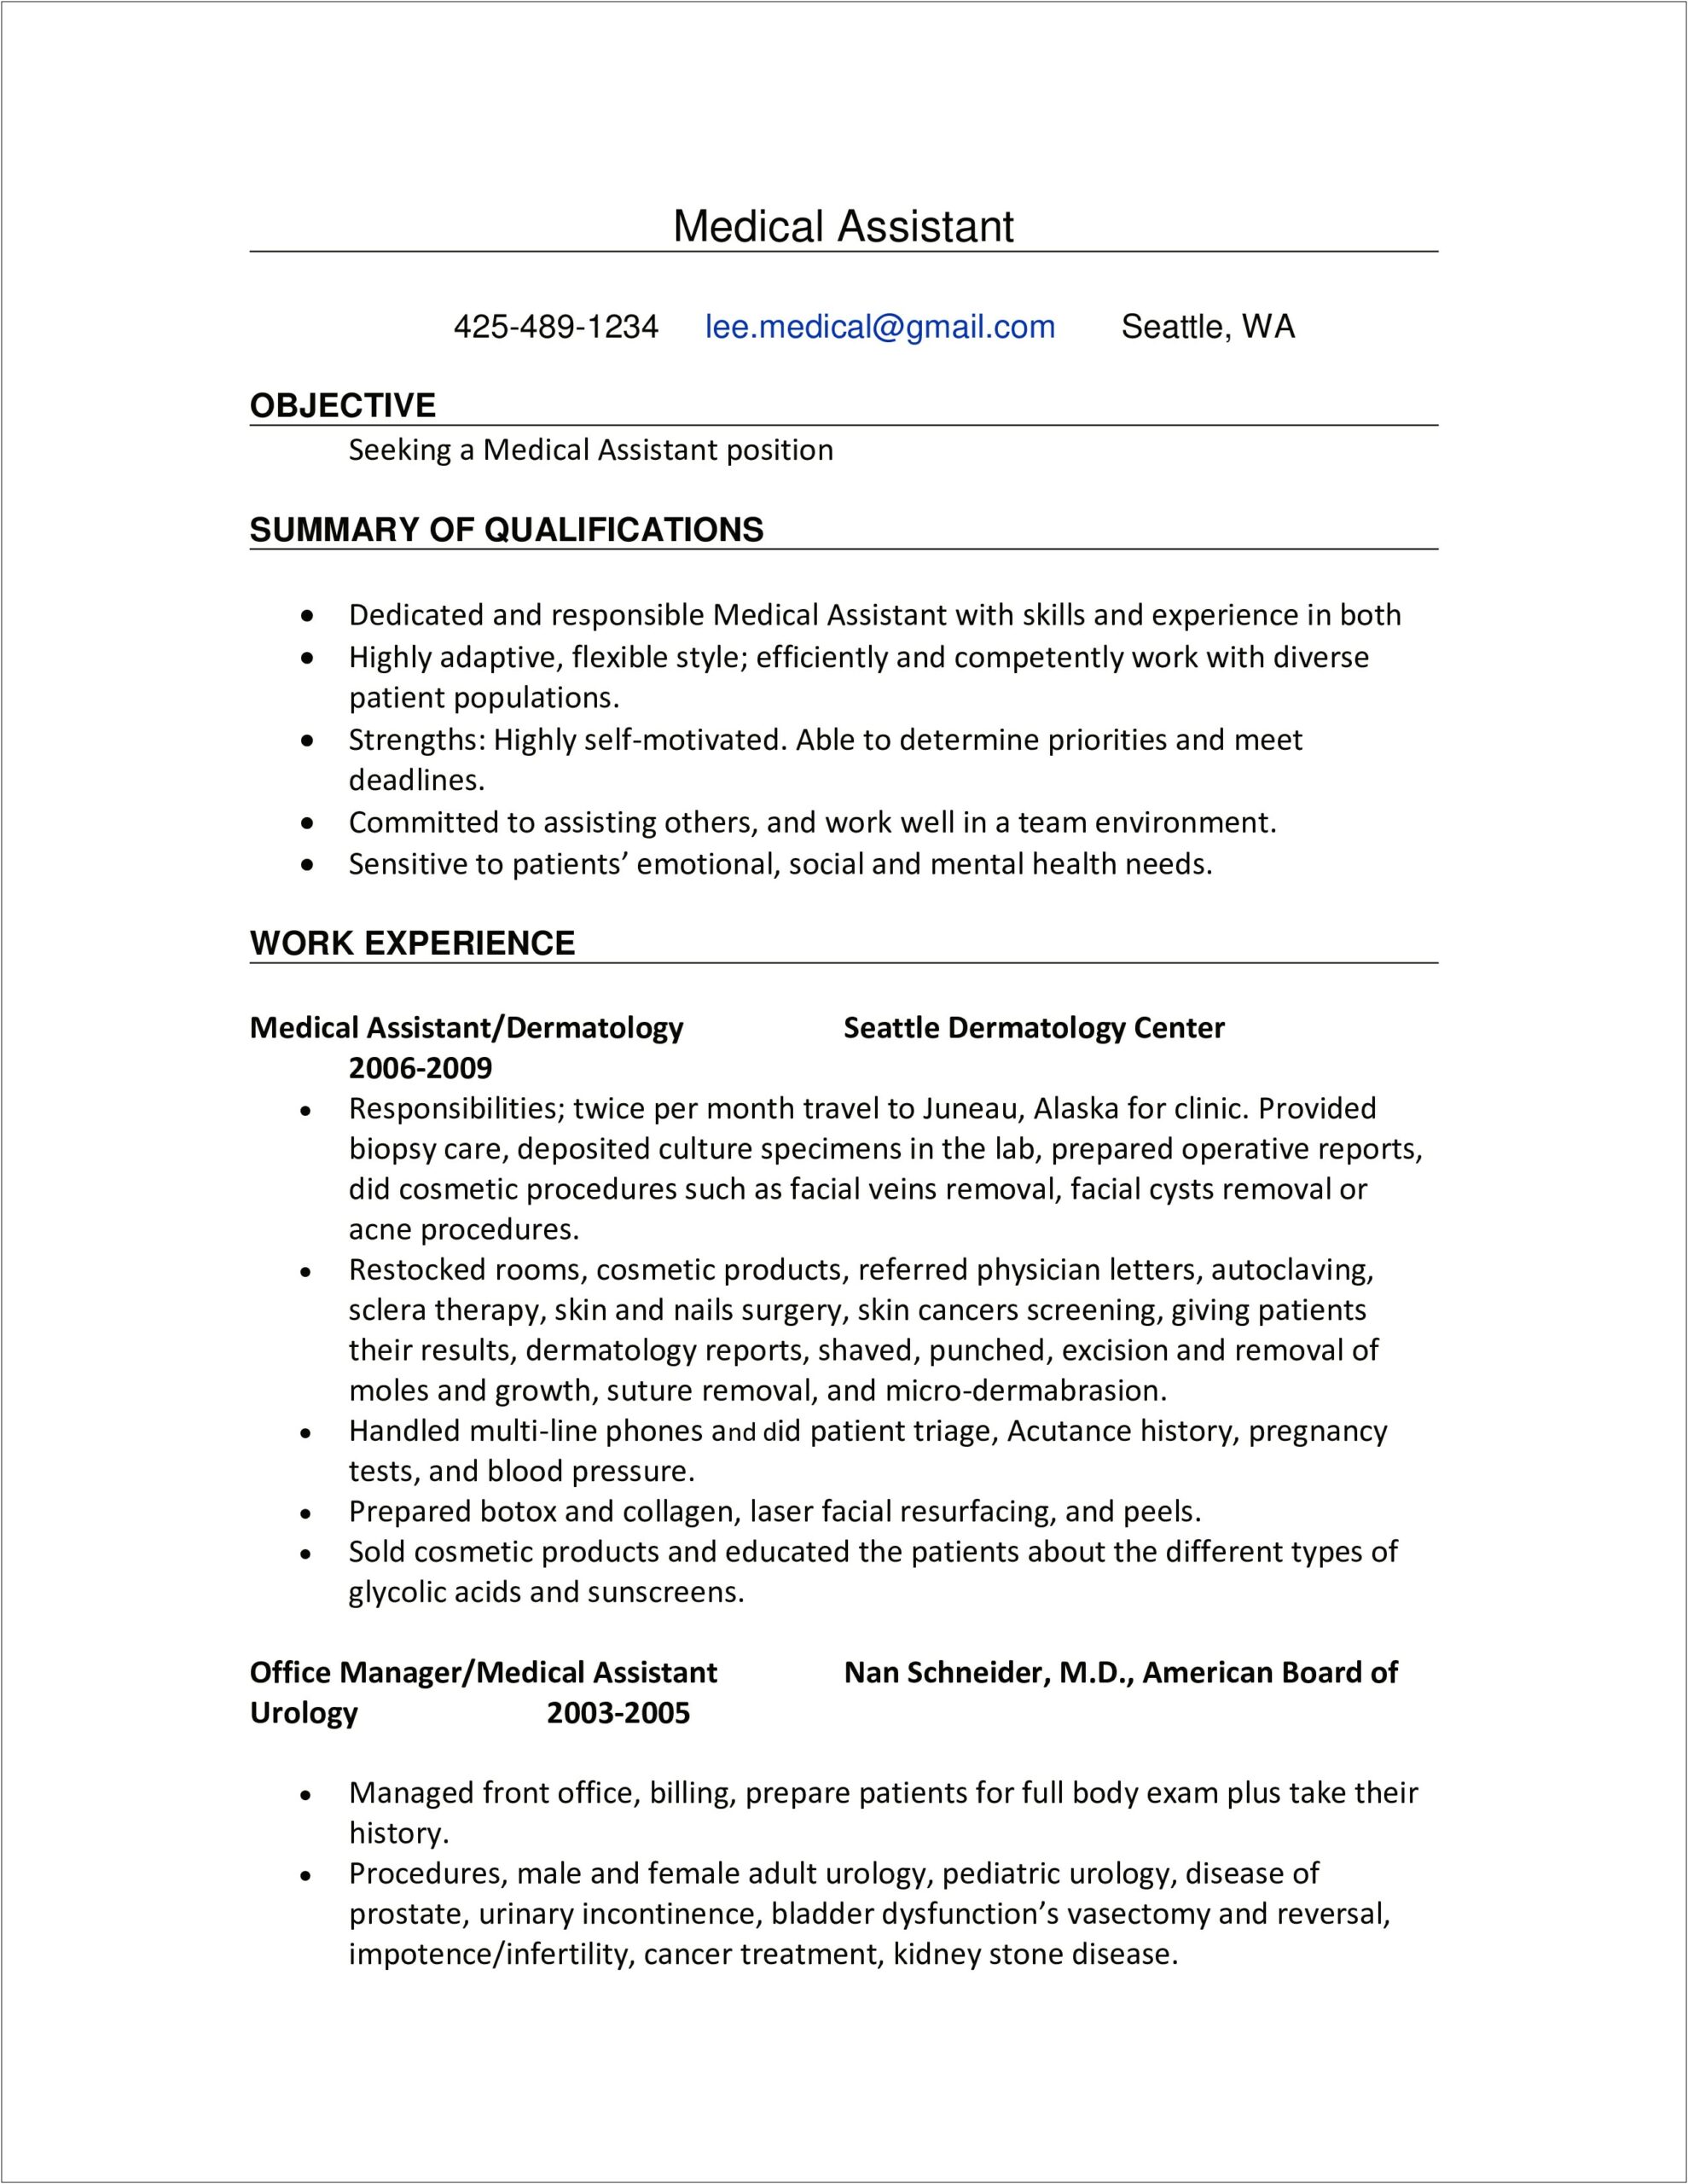 Clinical Skills For Medical Assistant Resume